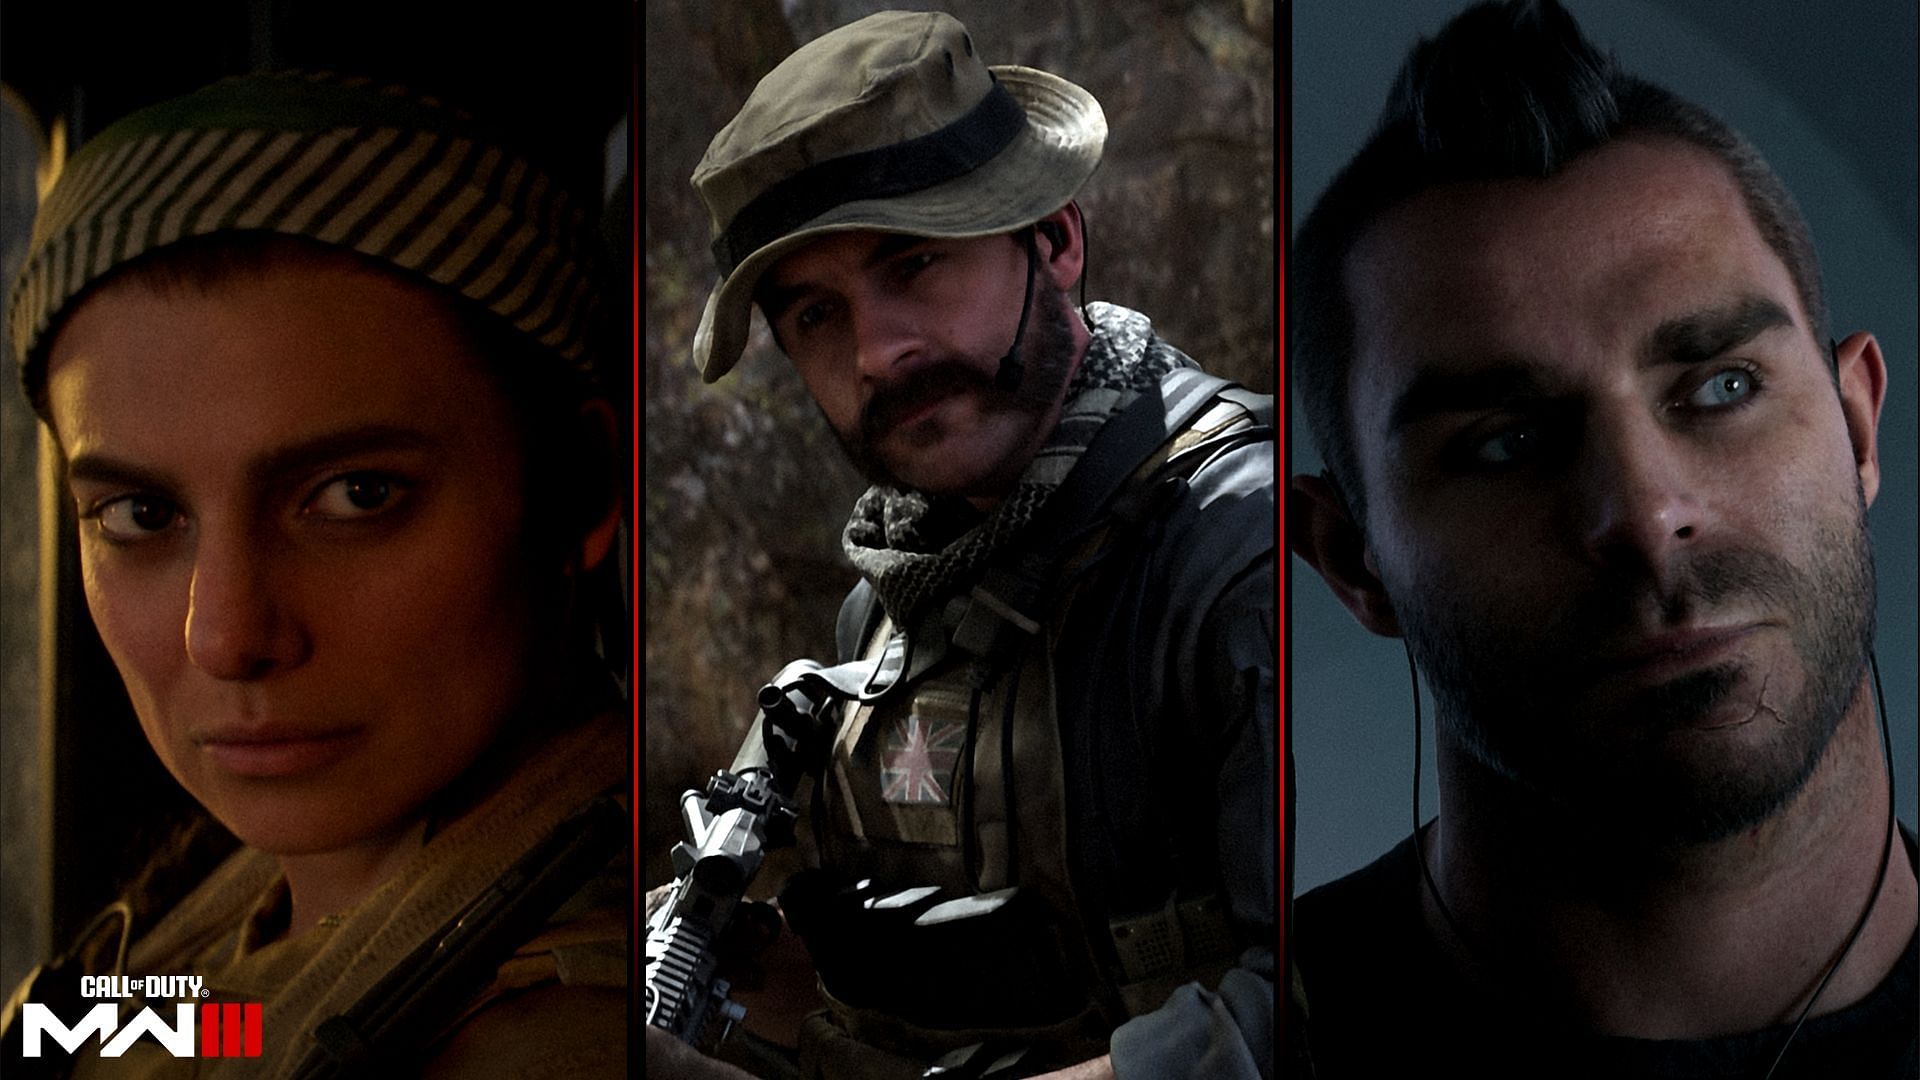 From the left, Farah, Captain Price, and Soap McTavish